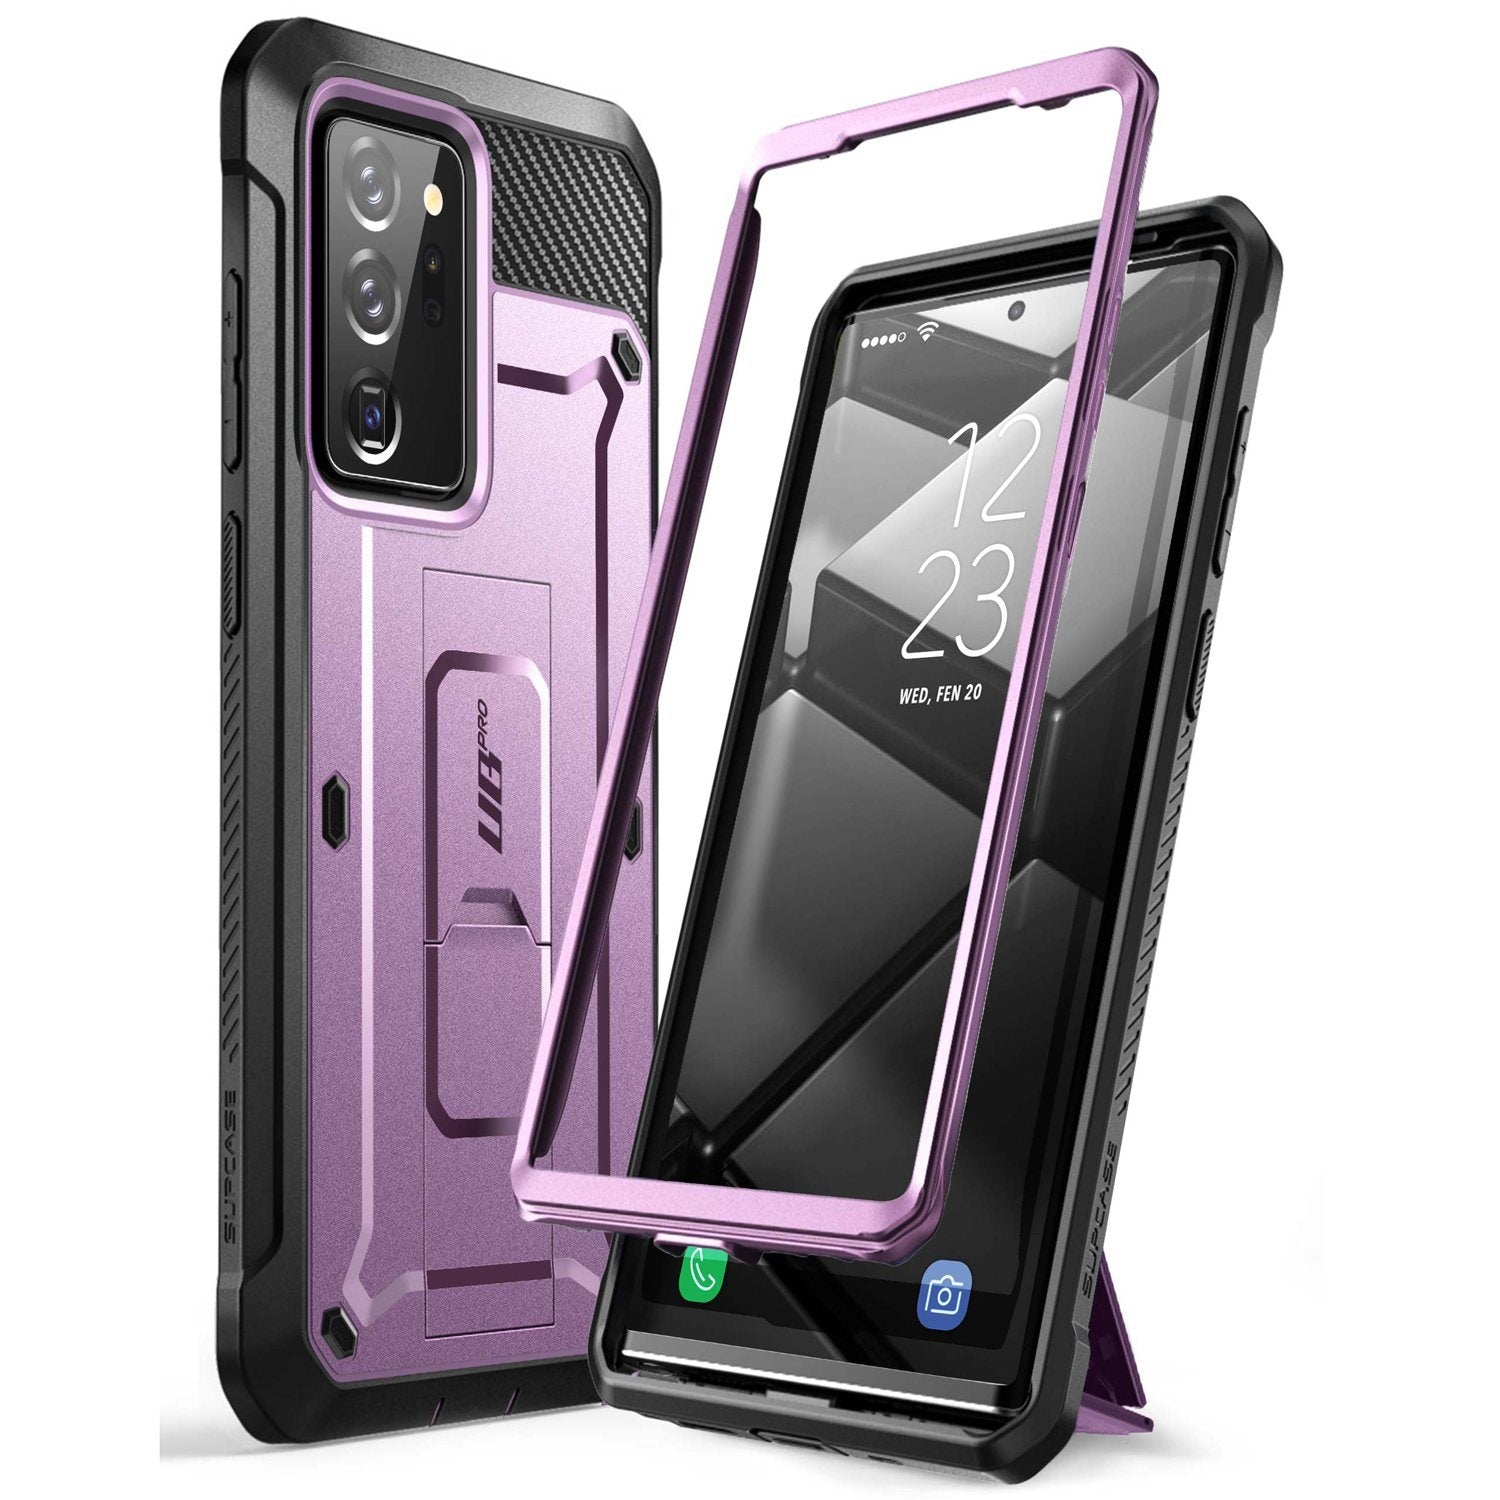 Supcase UB Pro Series Full-Body Rugged Holster Case for Samsung Galaxy Note 20 Ultra(Without Screen Protector), Violte Default supcase 